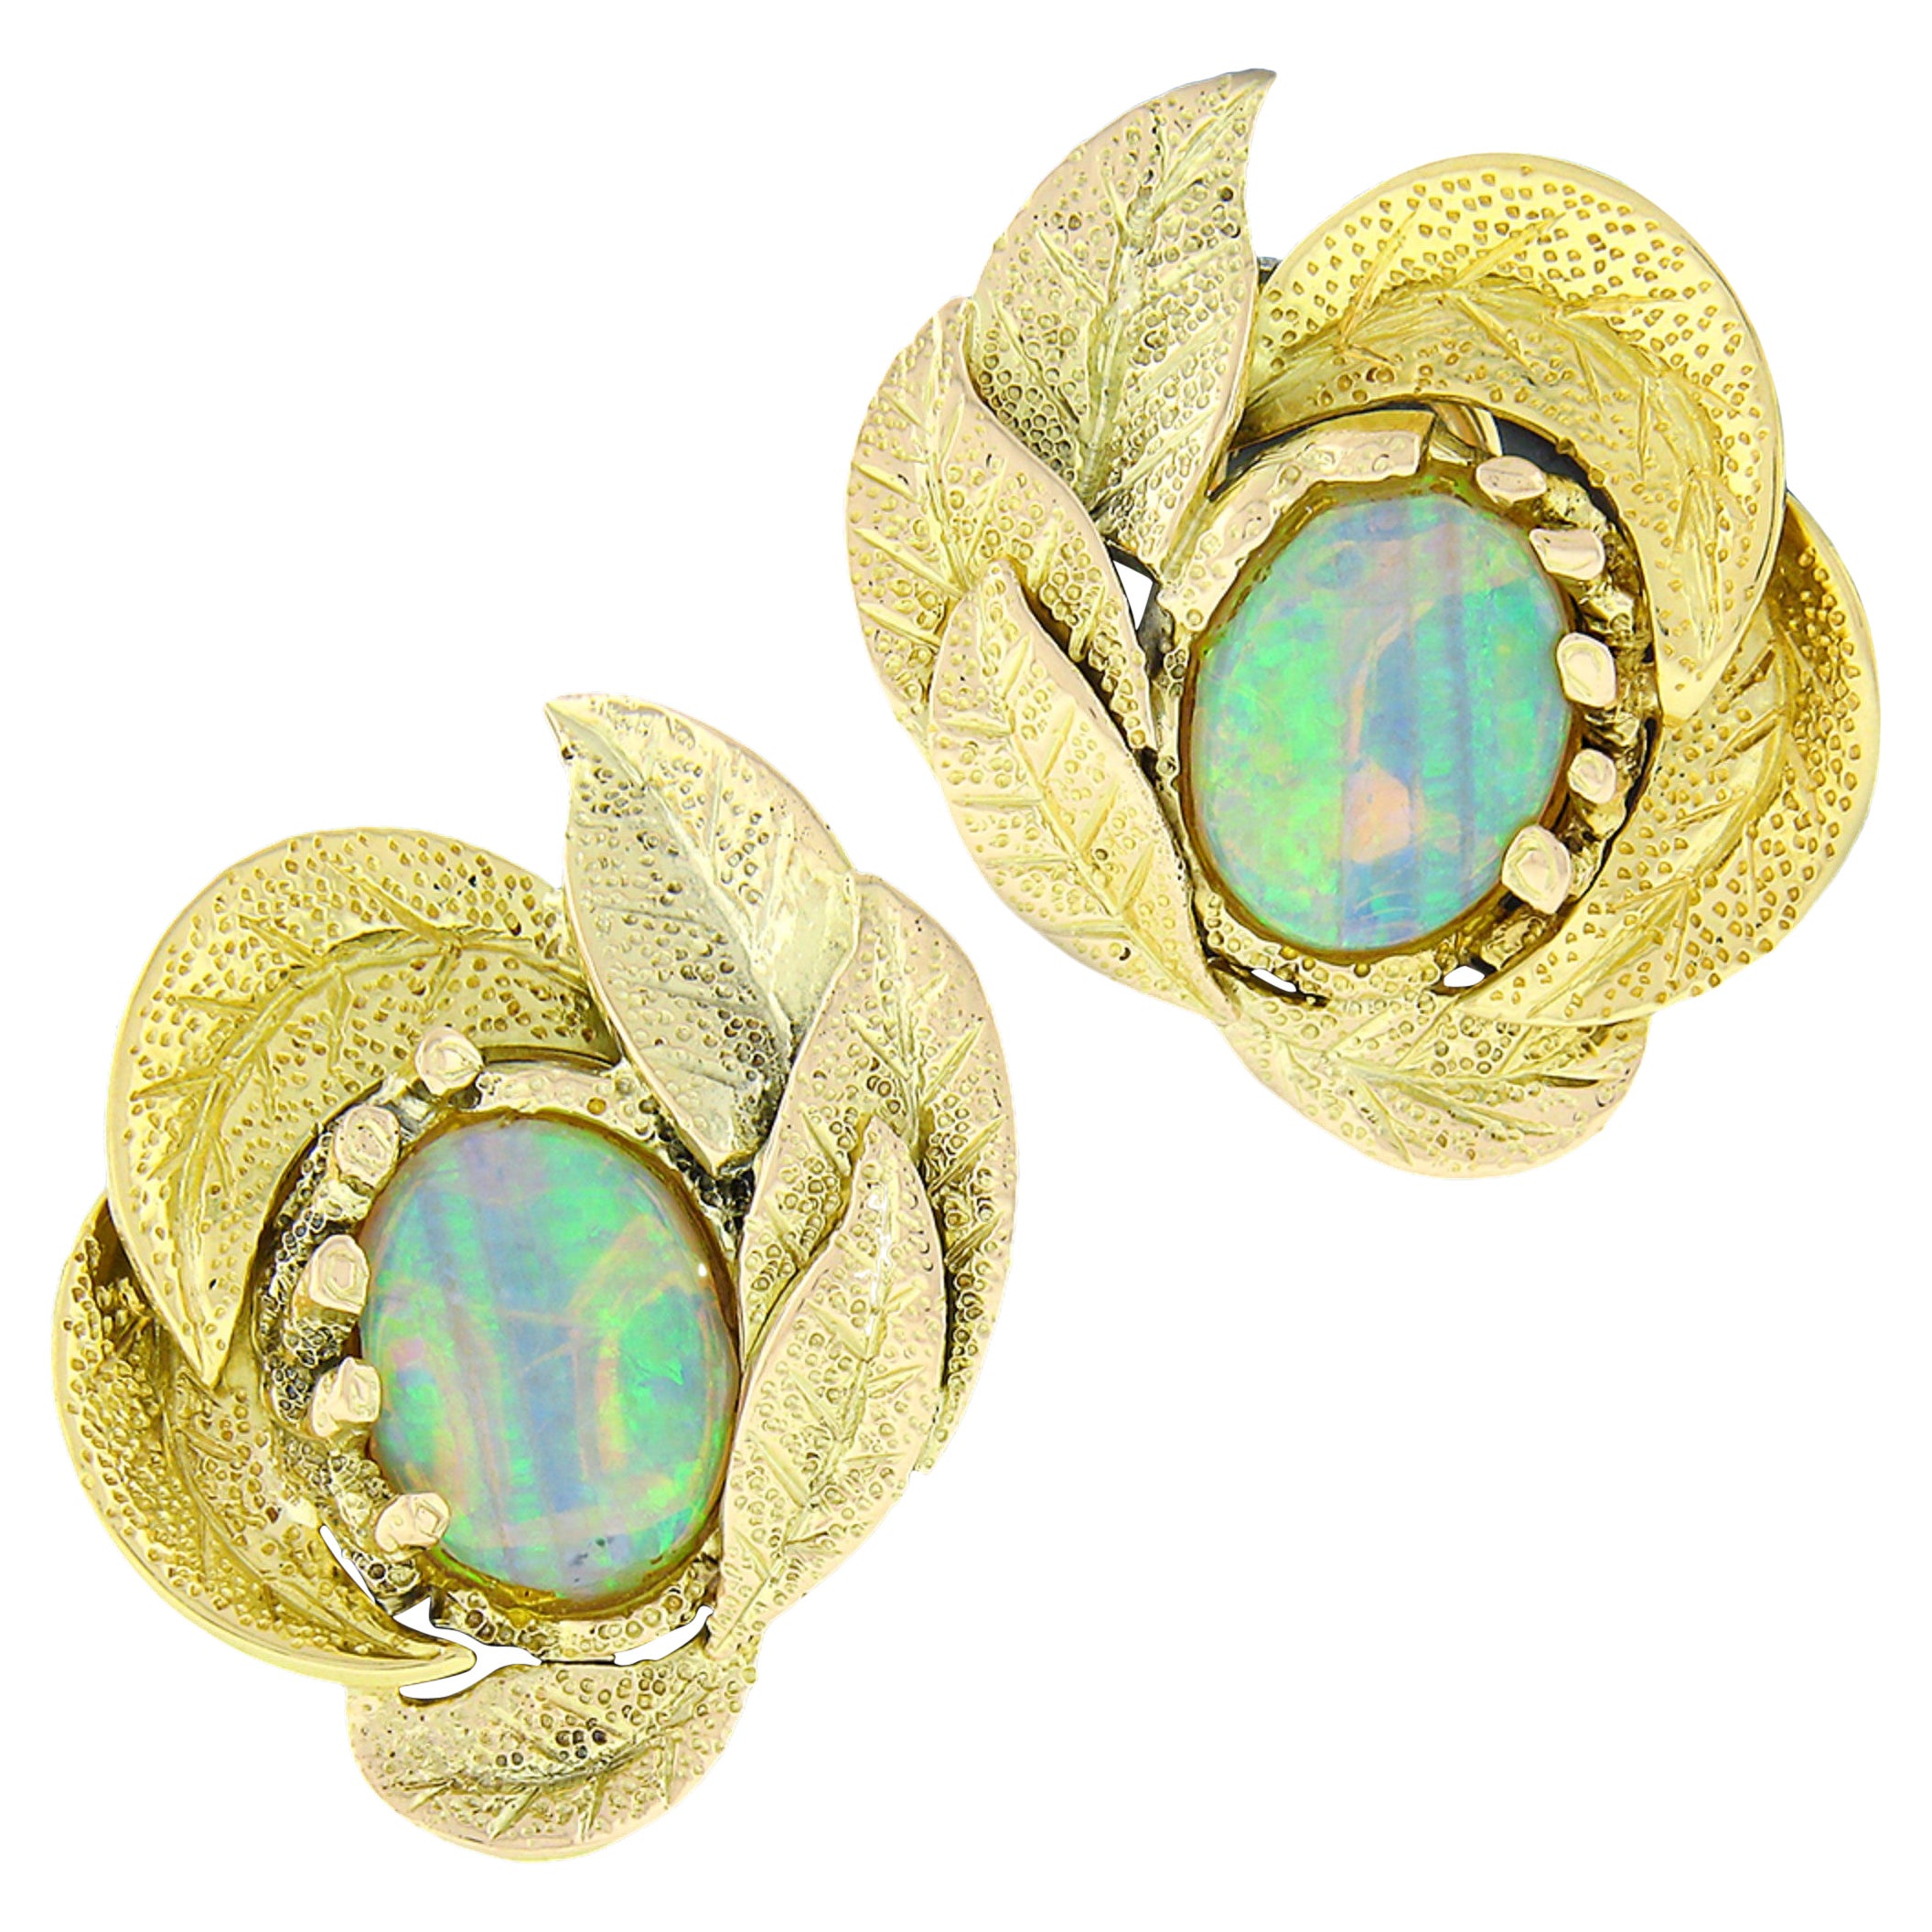 Vintage 14K Yellow Gold Oval Cabochon Opal Textured Floral Leaf Frame Earrings